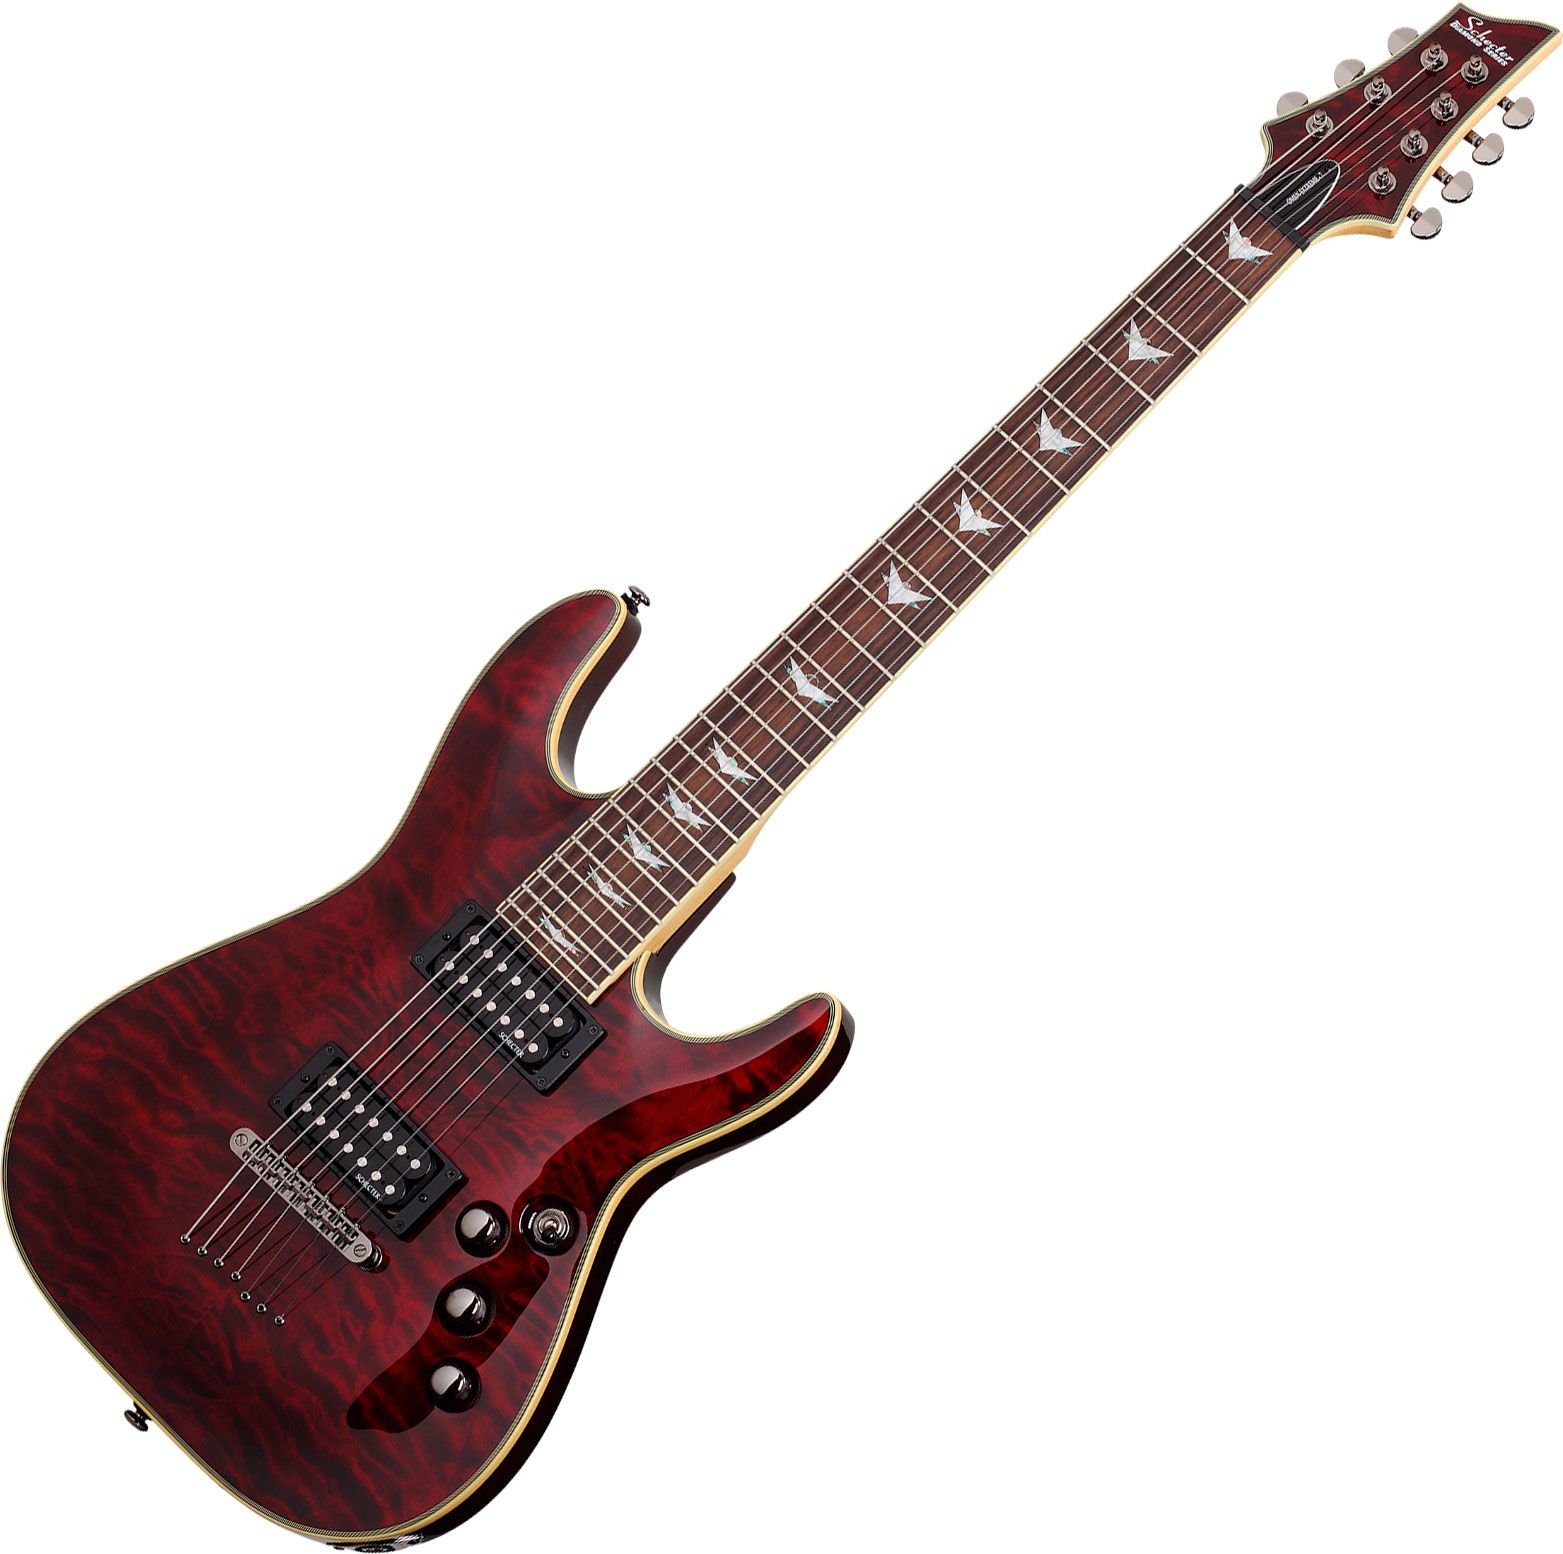 Schecter Omen Extreme-7 Electric Guitar in Black Cherry Finish